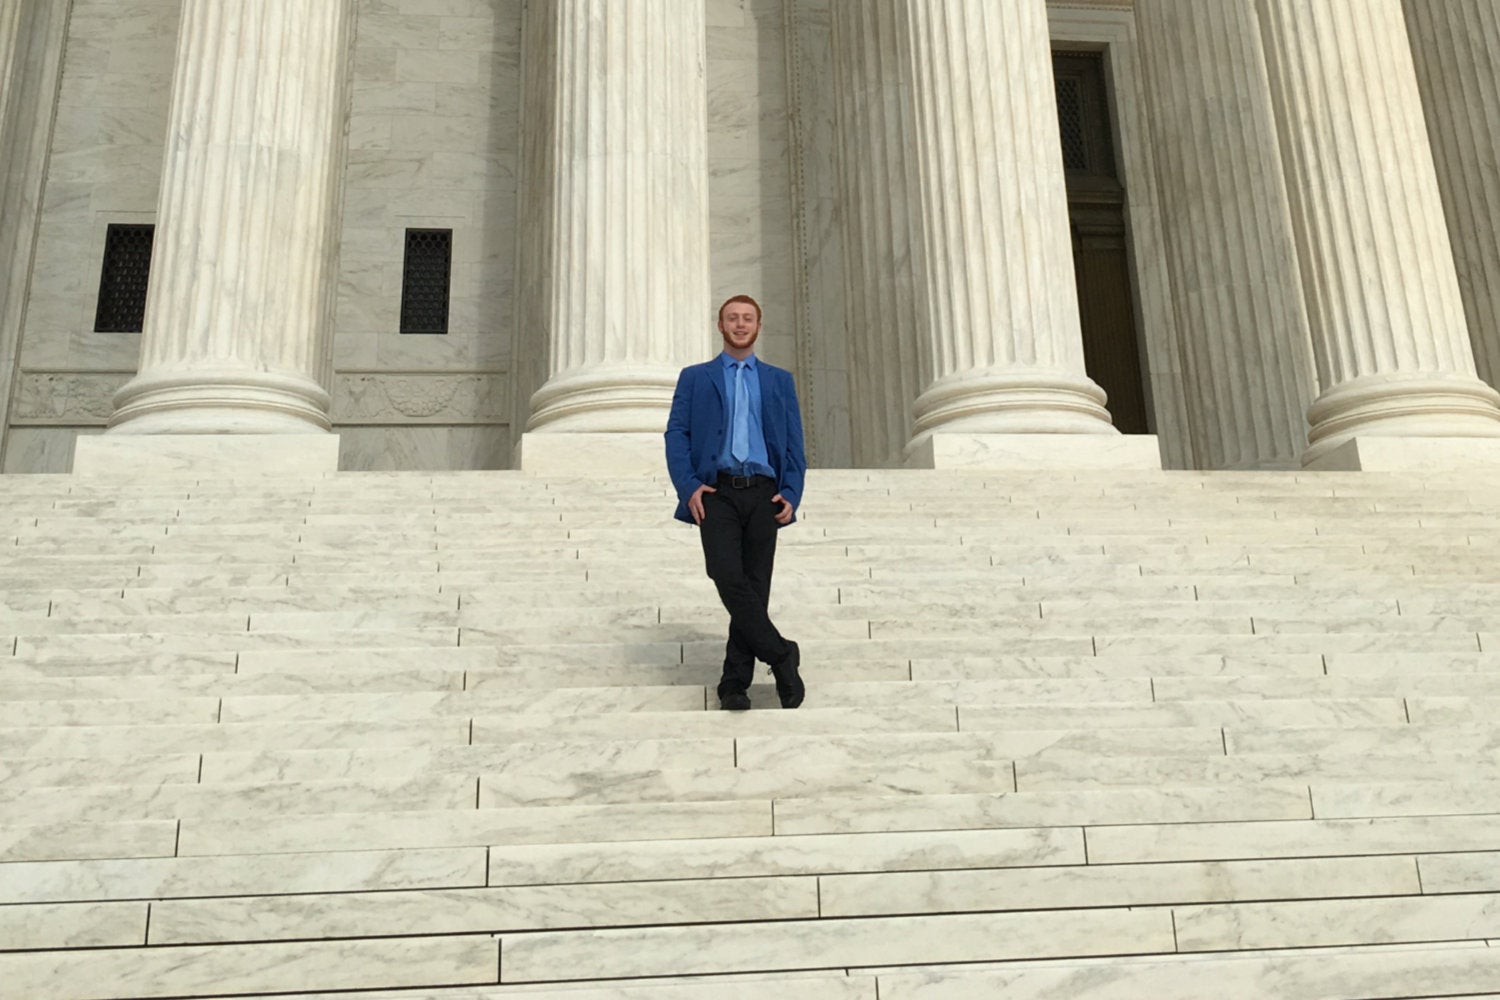 Scholarship recipient Sam Foer on the steps of the Supreme Court in DC